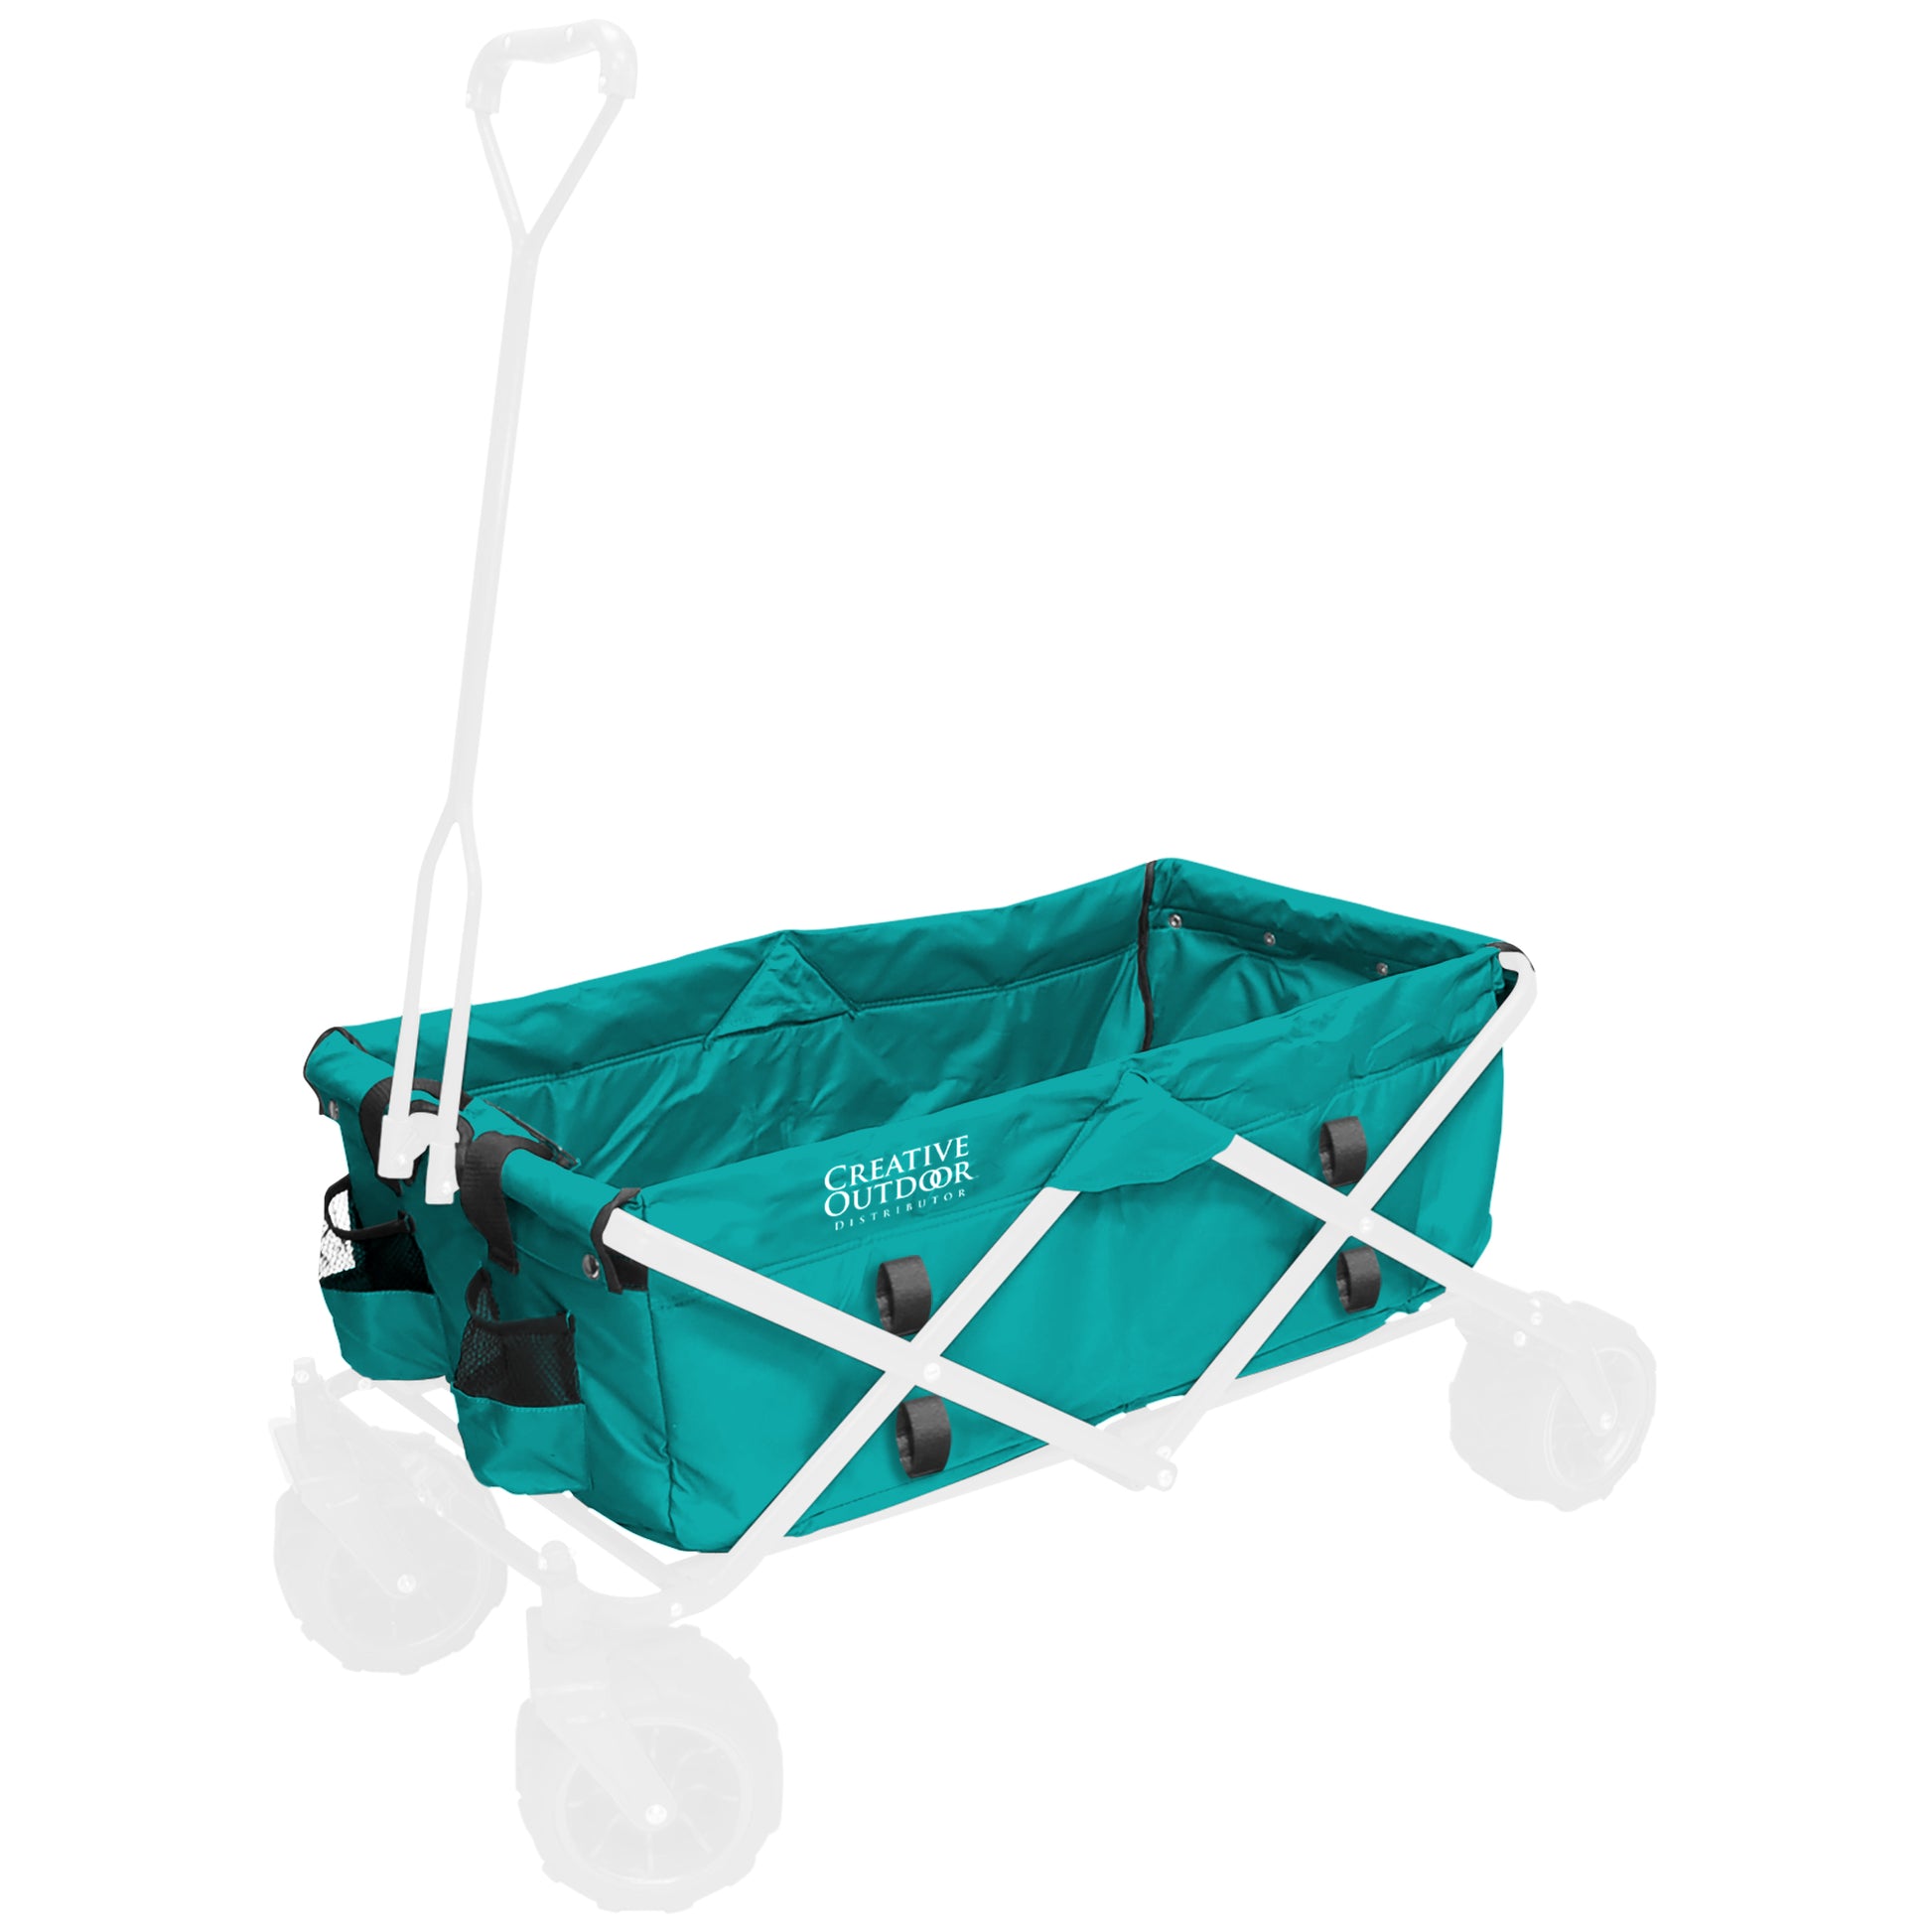 All-Terrain Folding Wagon Replacement Fabric - TEAL